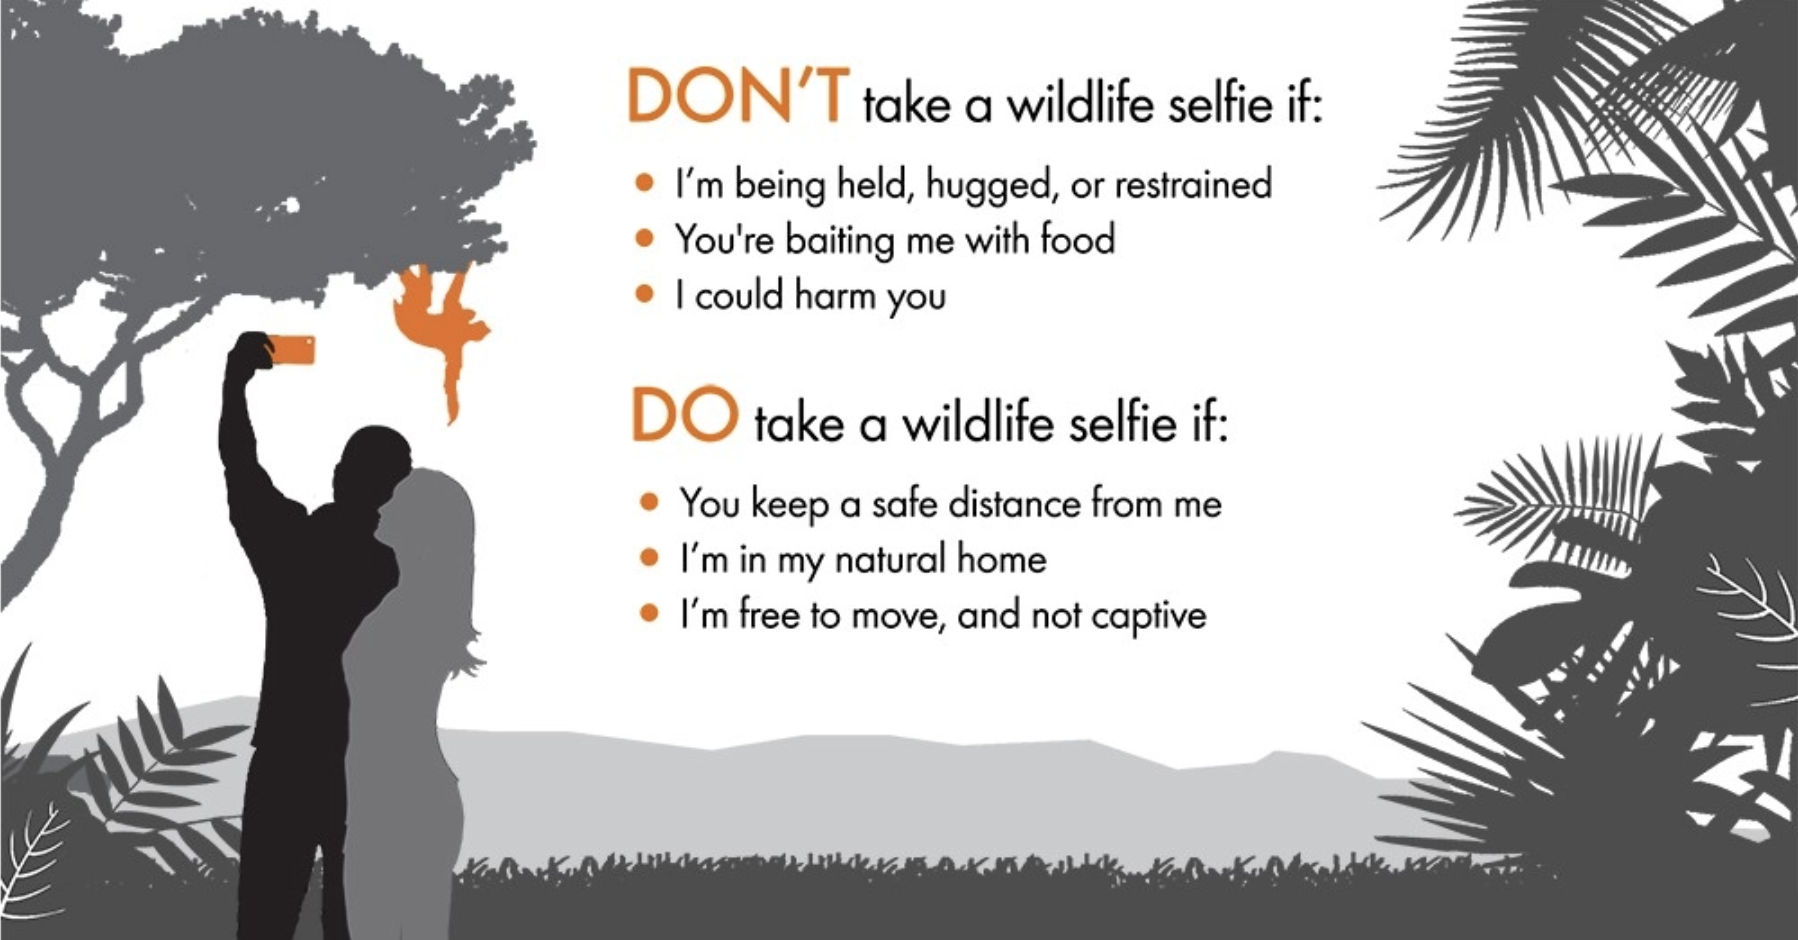 Infographic of the terms of the Wildlife Selfie Code.